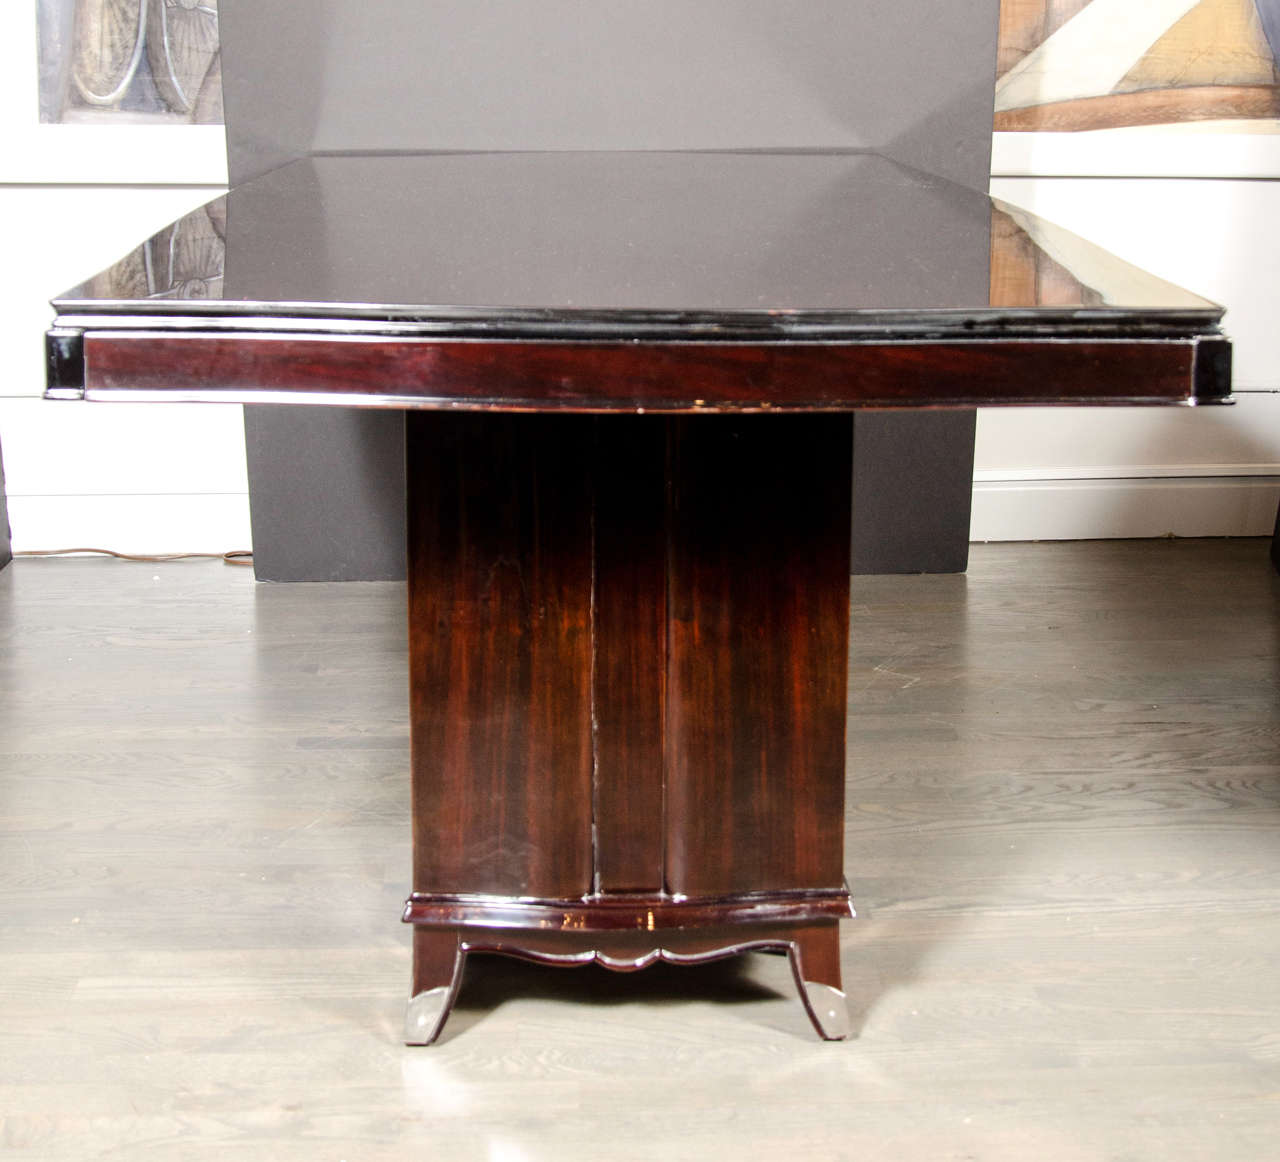 Elegant Art Deco Dining Table Attributed to Adnet 1